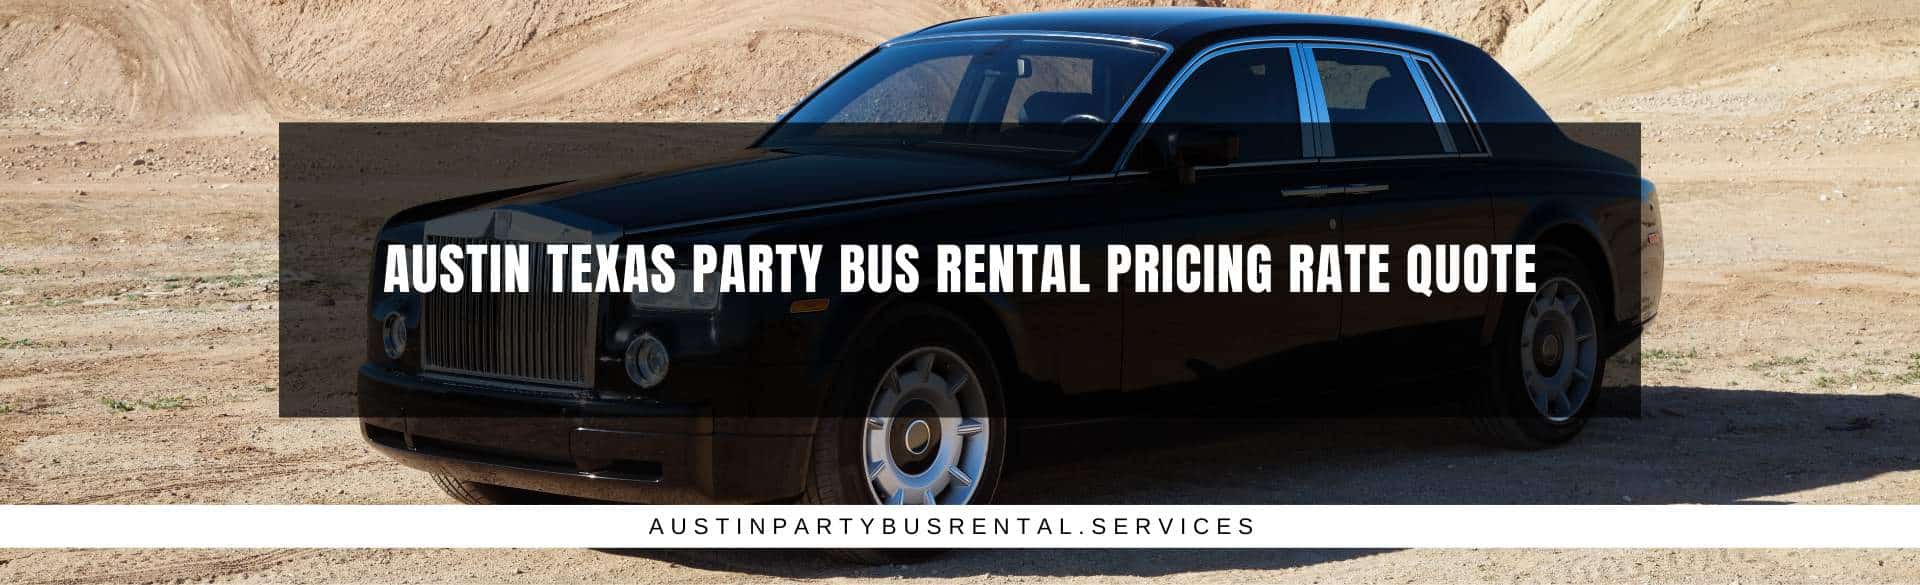 Austin Texas Party Bus Rental Pricing Rate Quote